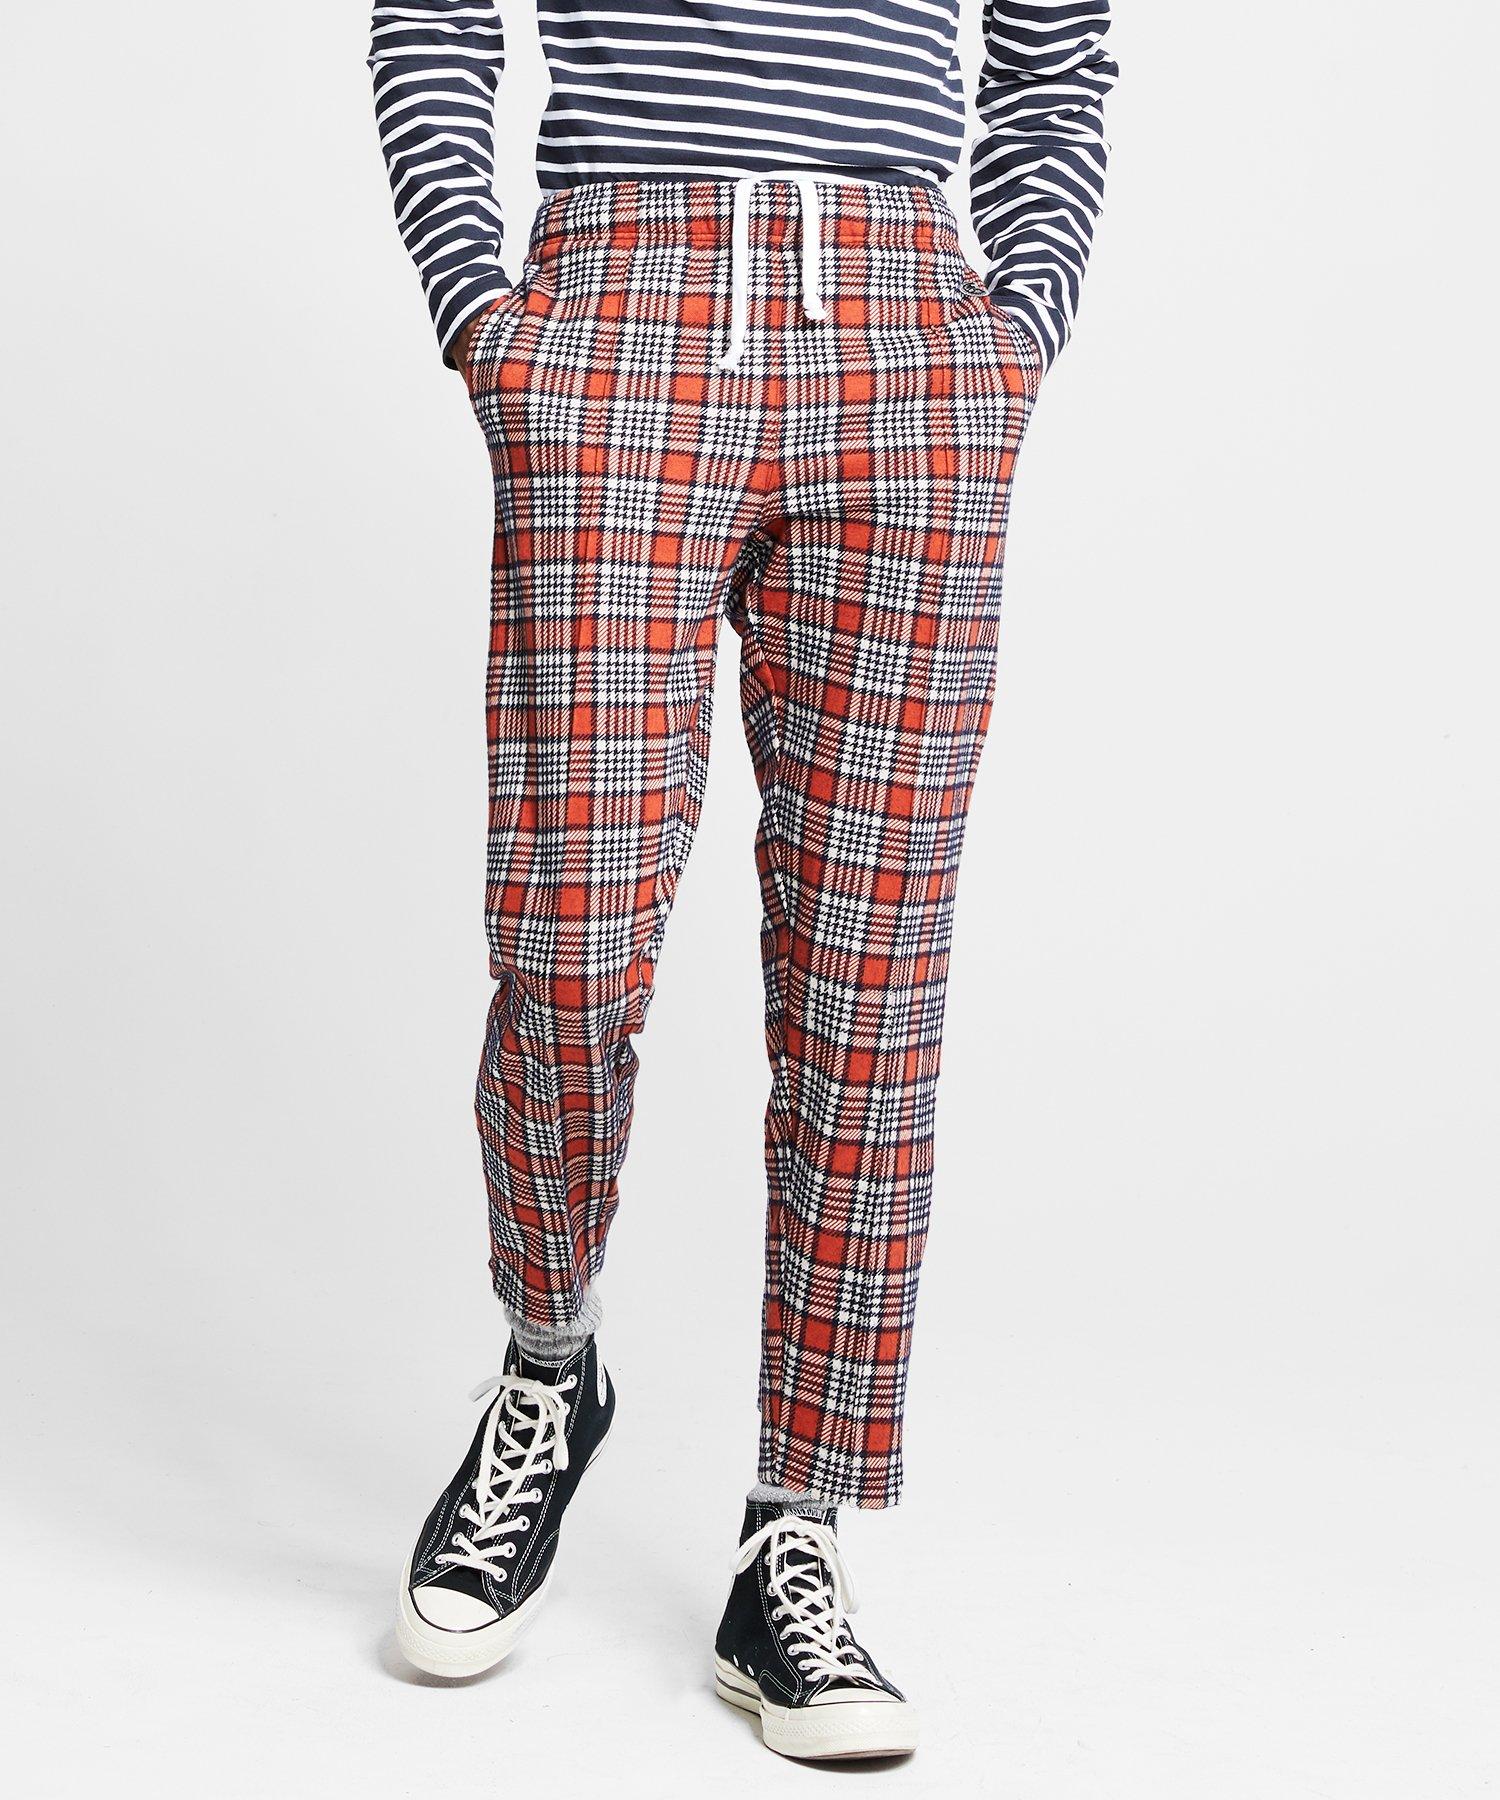 Todd Snyder Champion Wool Orange Plaid Pintuck Track Pant for Men 